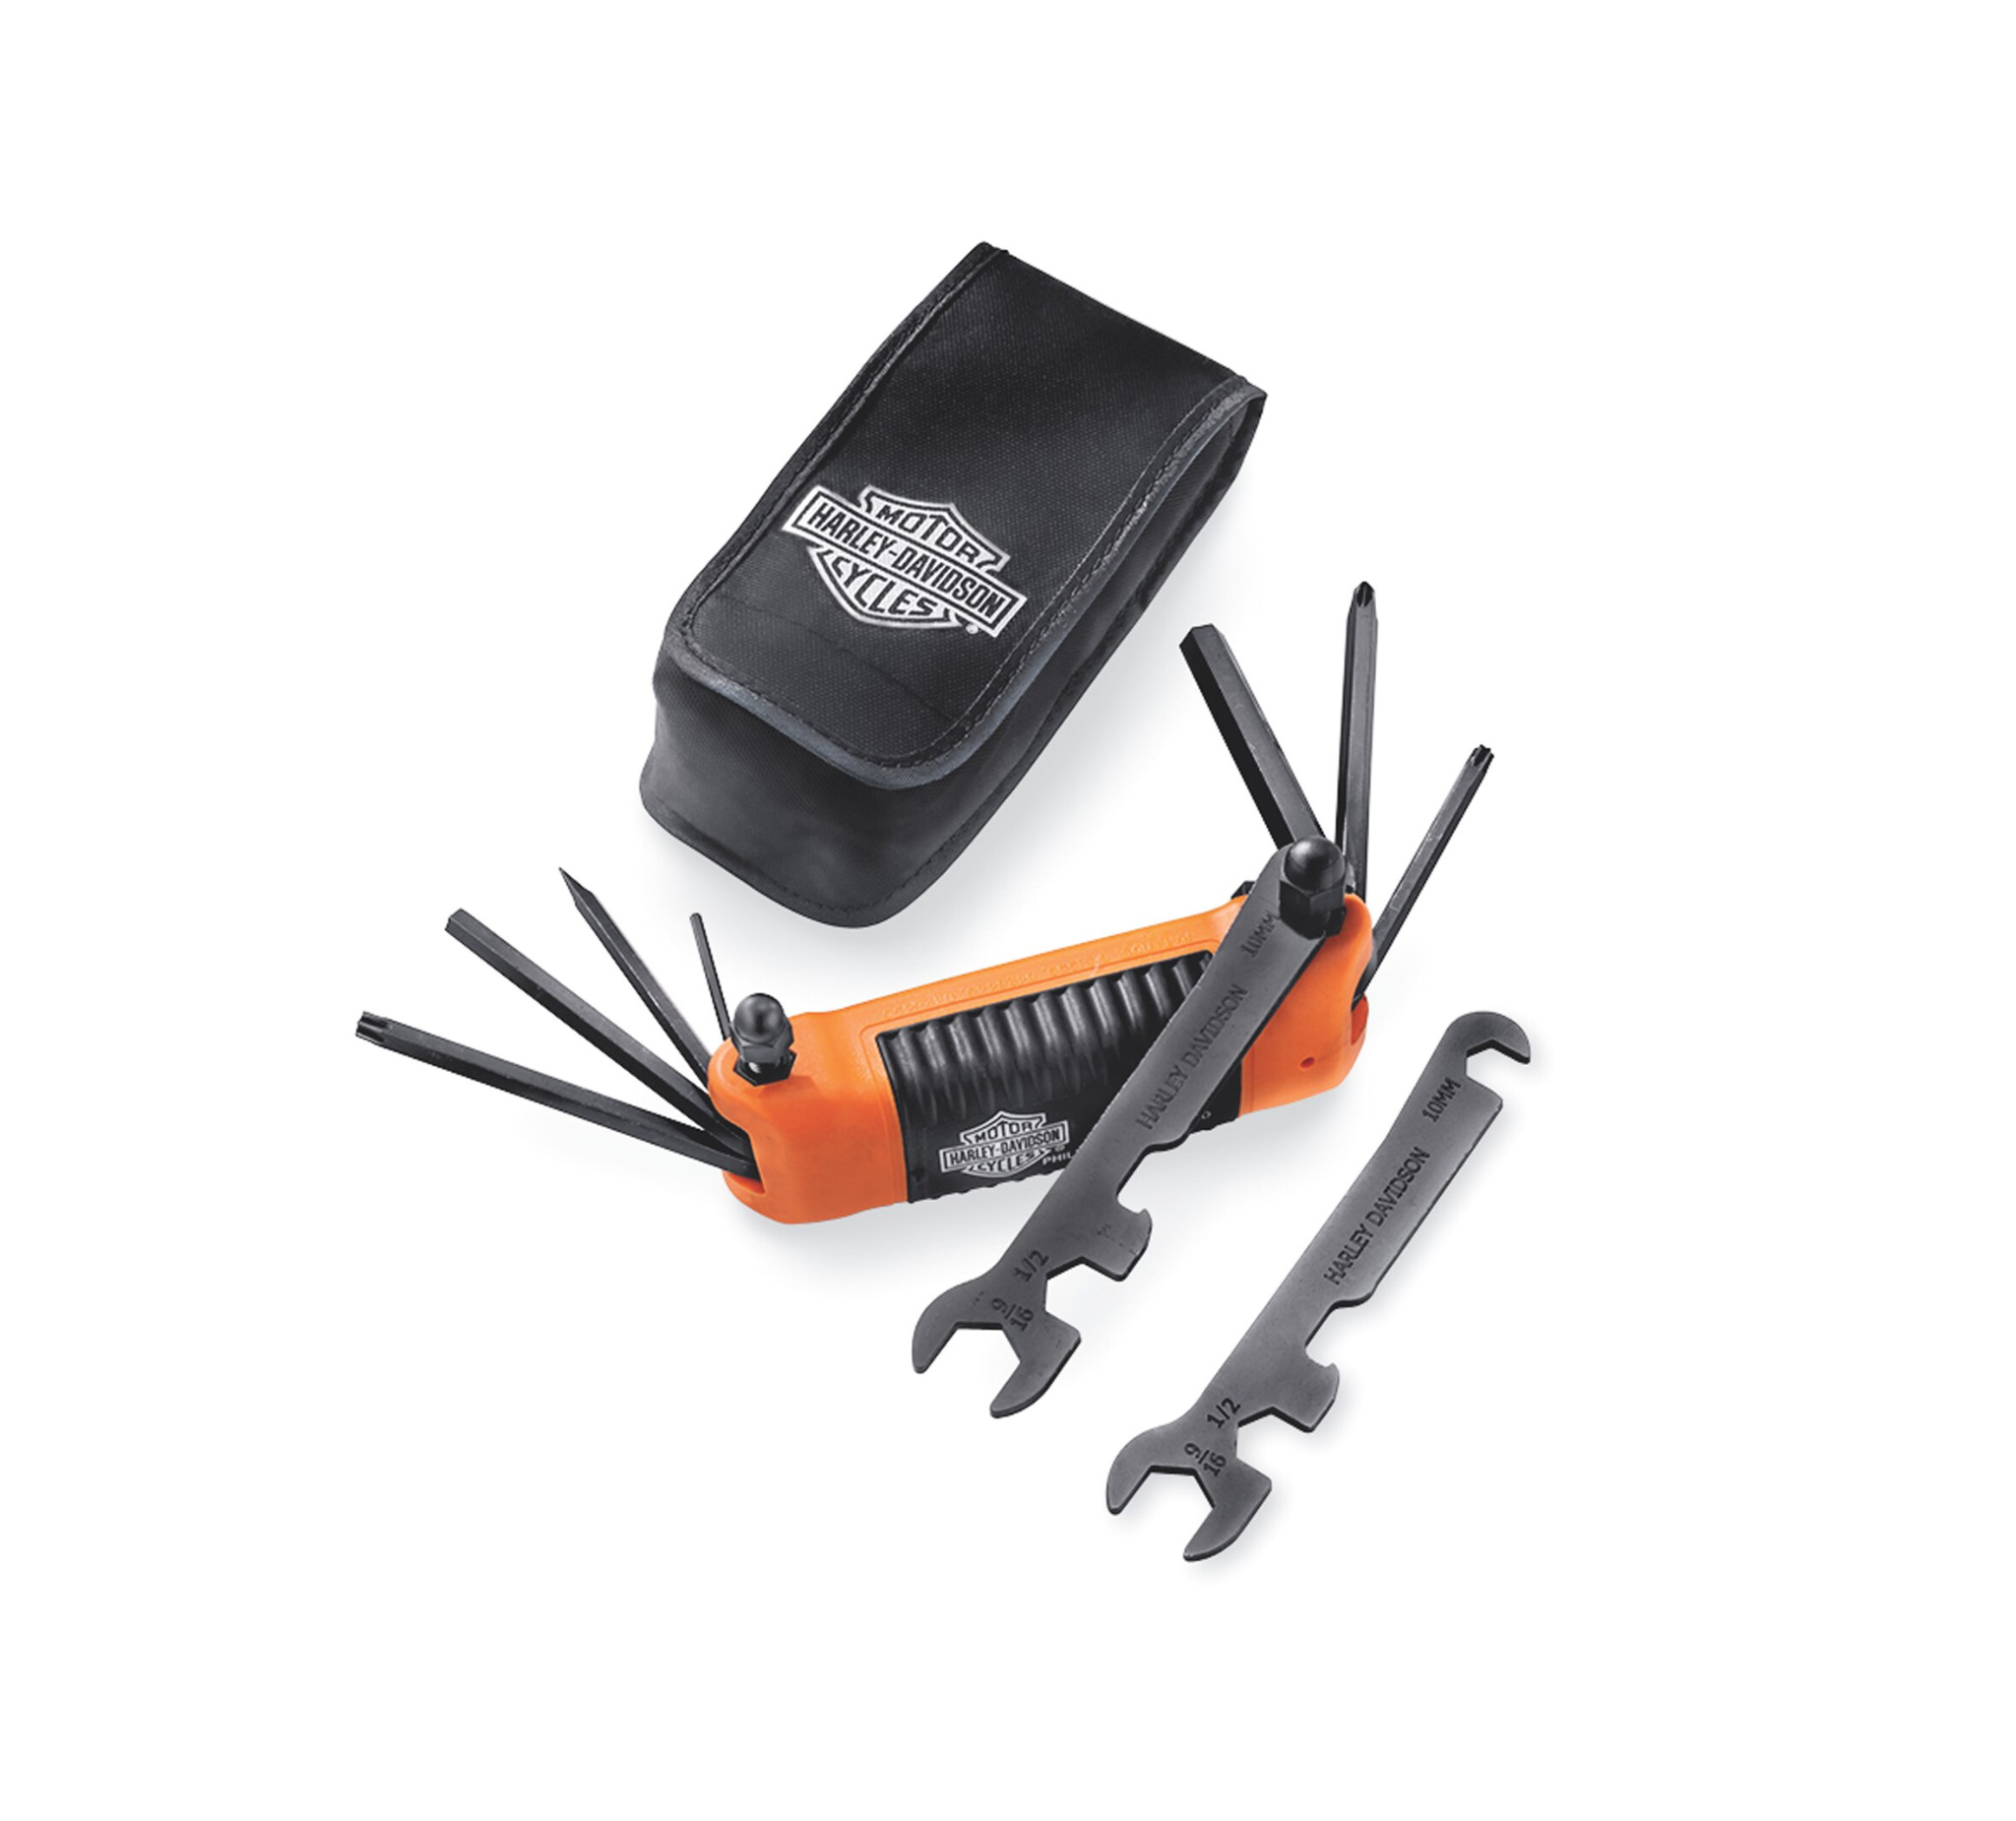 All-in-One Folding Tool 94435-10 | Harley-Davidson USA